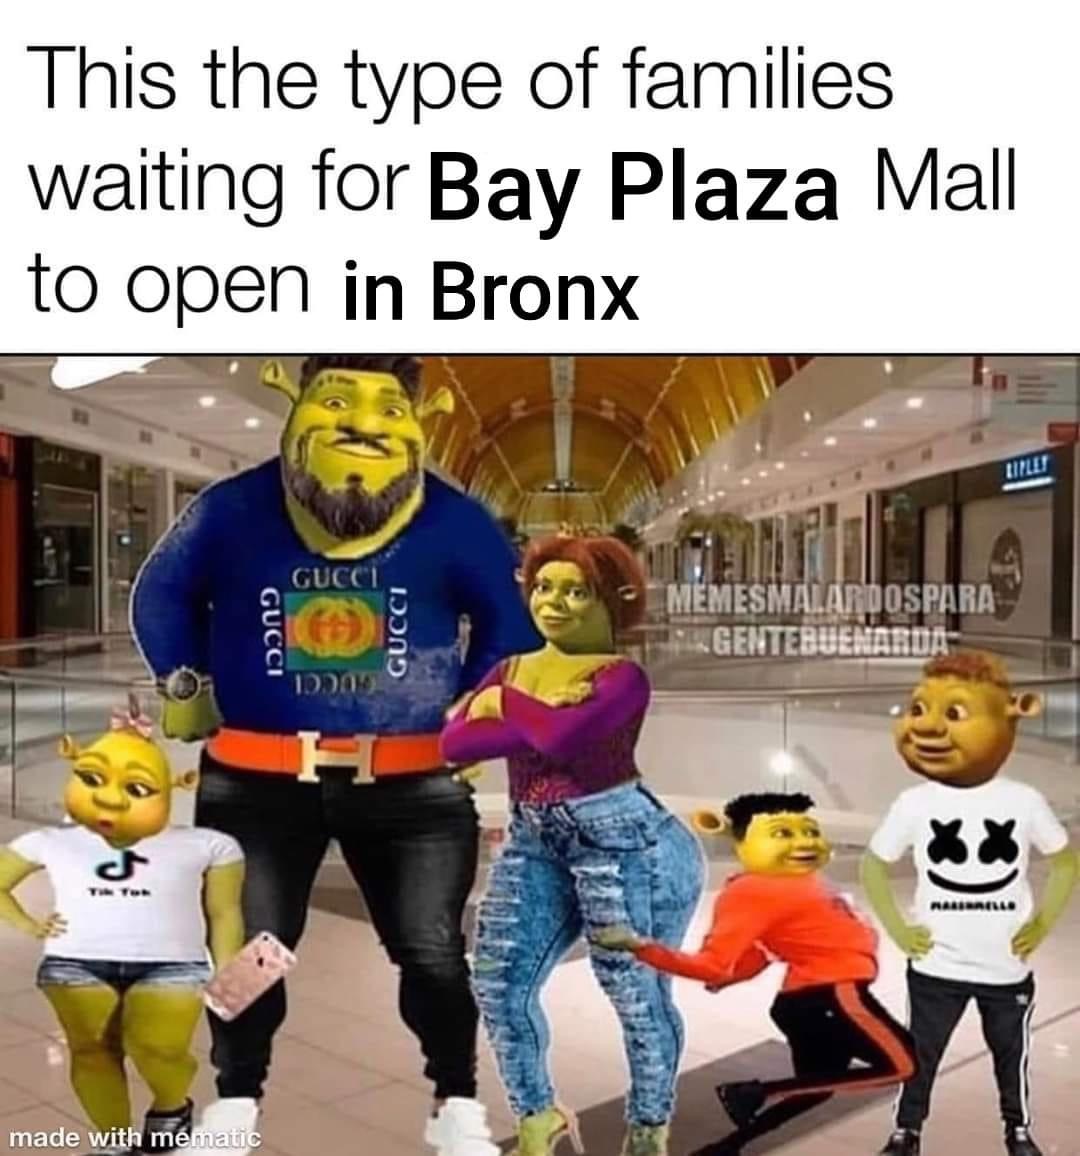 princess fiona - This the type of families waiting for Bay Plaza Mall to open in Bronx Uitlet Gucci Gucci Gucci Memesmalardos Para Pungenteruenart 10 made with mematic